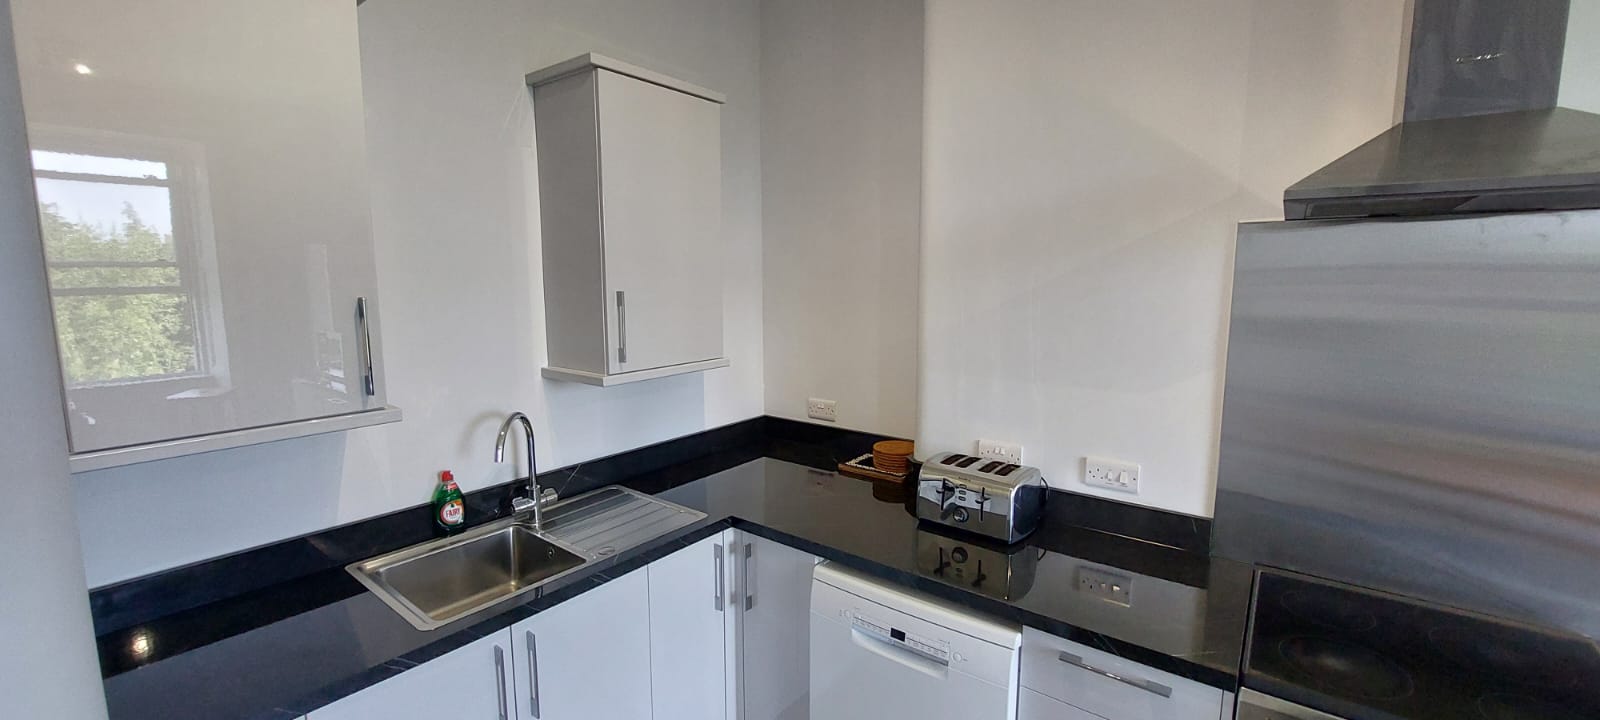 Flats to let in Edinburgh|flats to rent|property for rent